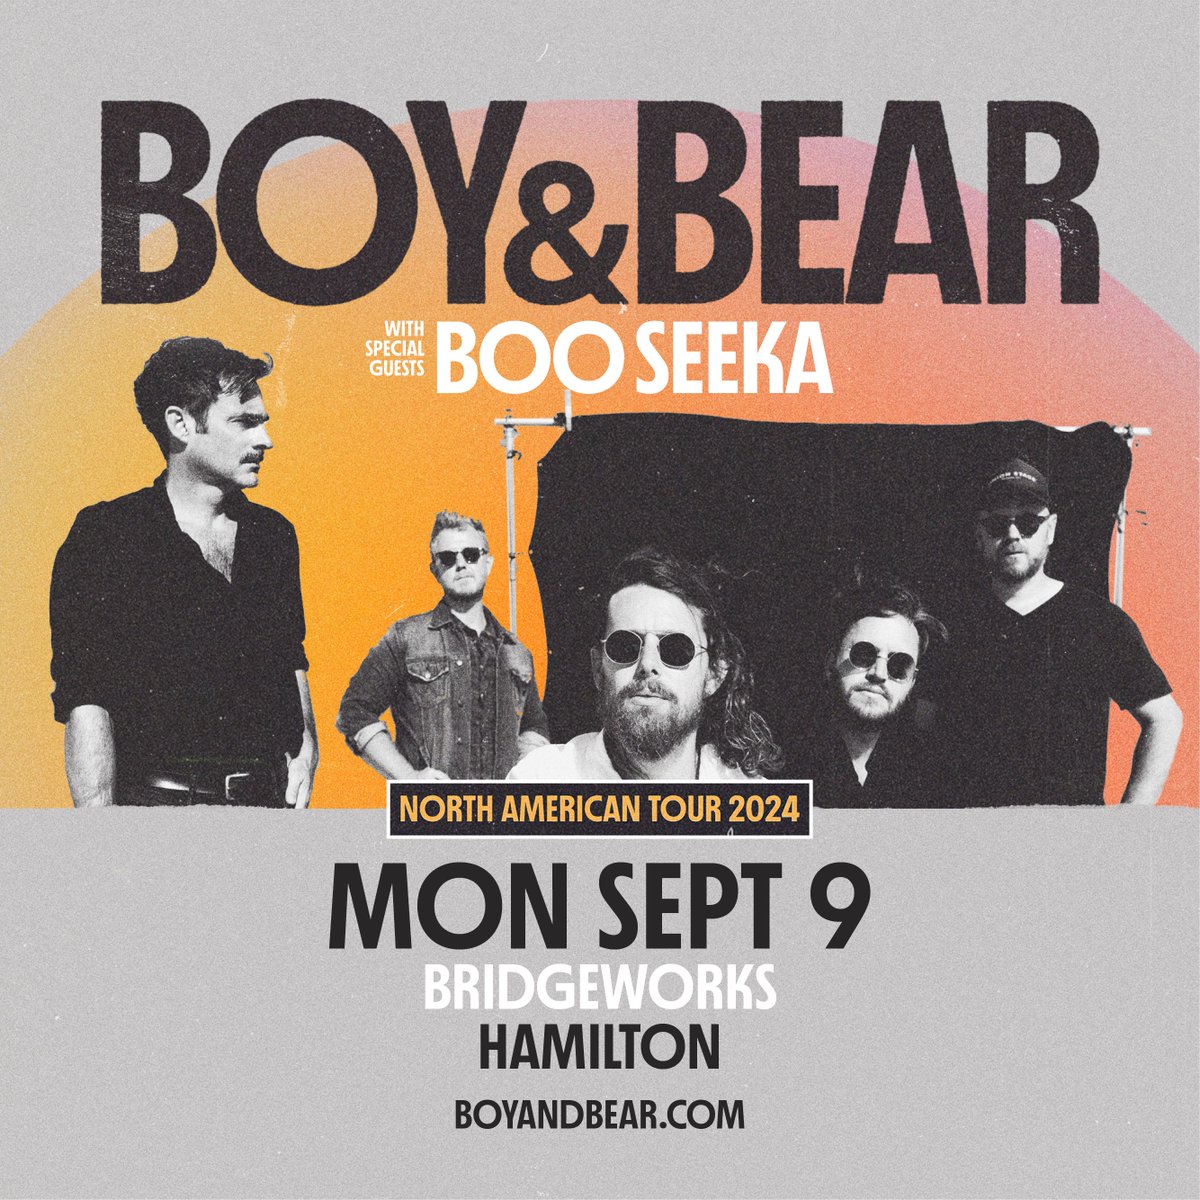 Australian indie mainstays Boy & Bear's live show offers a uniquely compelling experience that has earned them a reputation as one of Australia's most outstanding live acts. They'll be joined by Boo Seeka at BW on Sept 9. Tix on sale Friday at 10am via bridgeworks.ca!